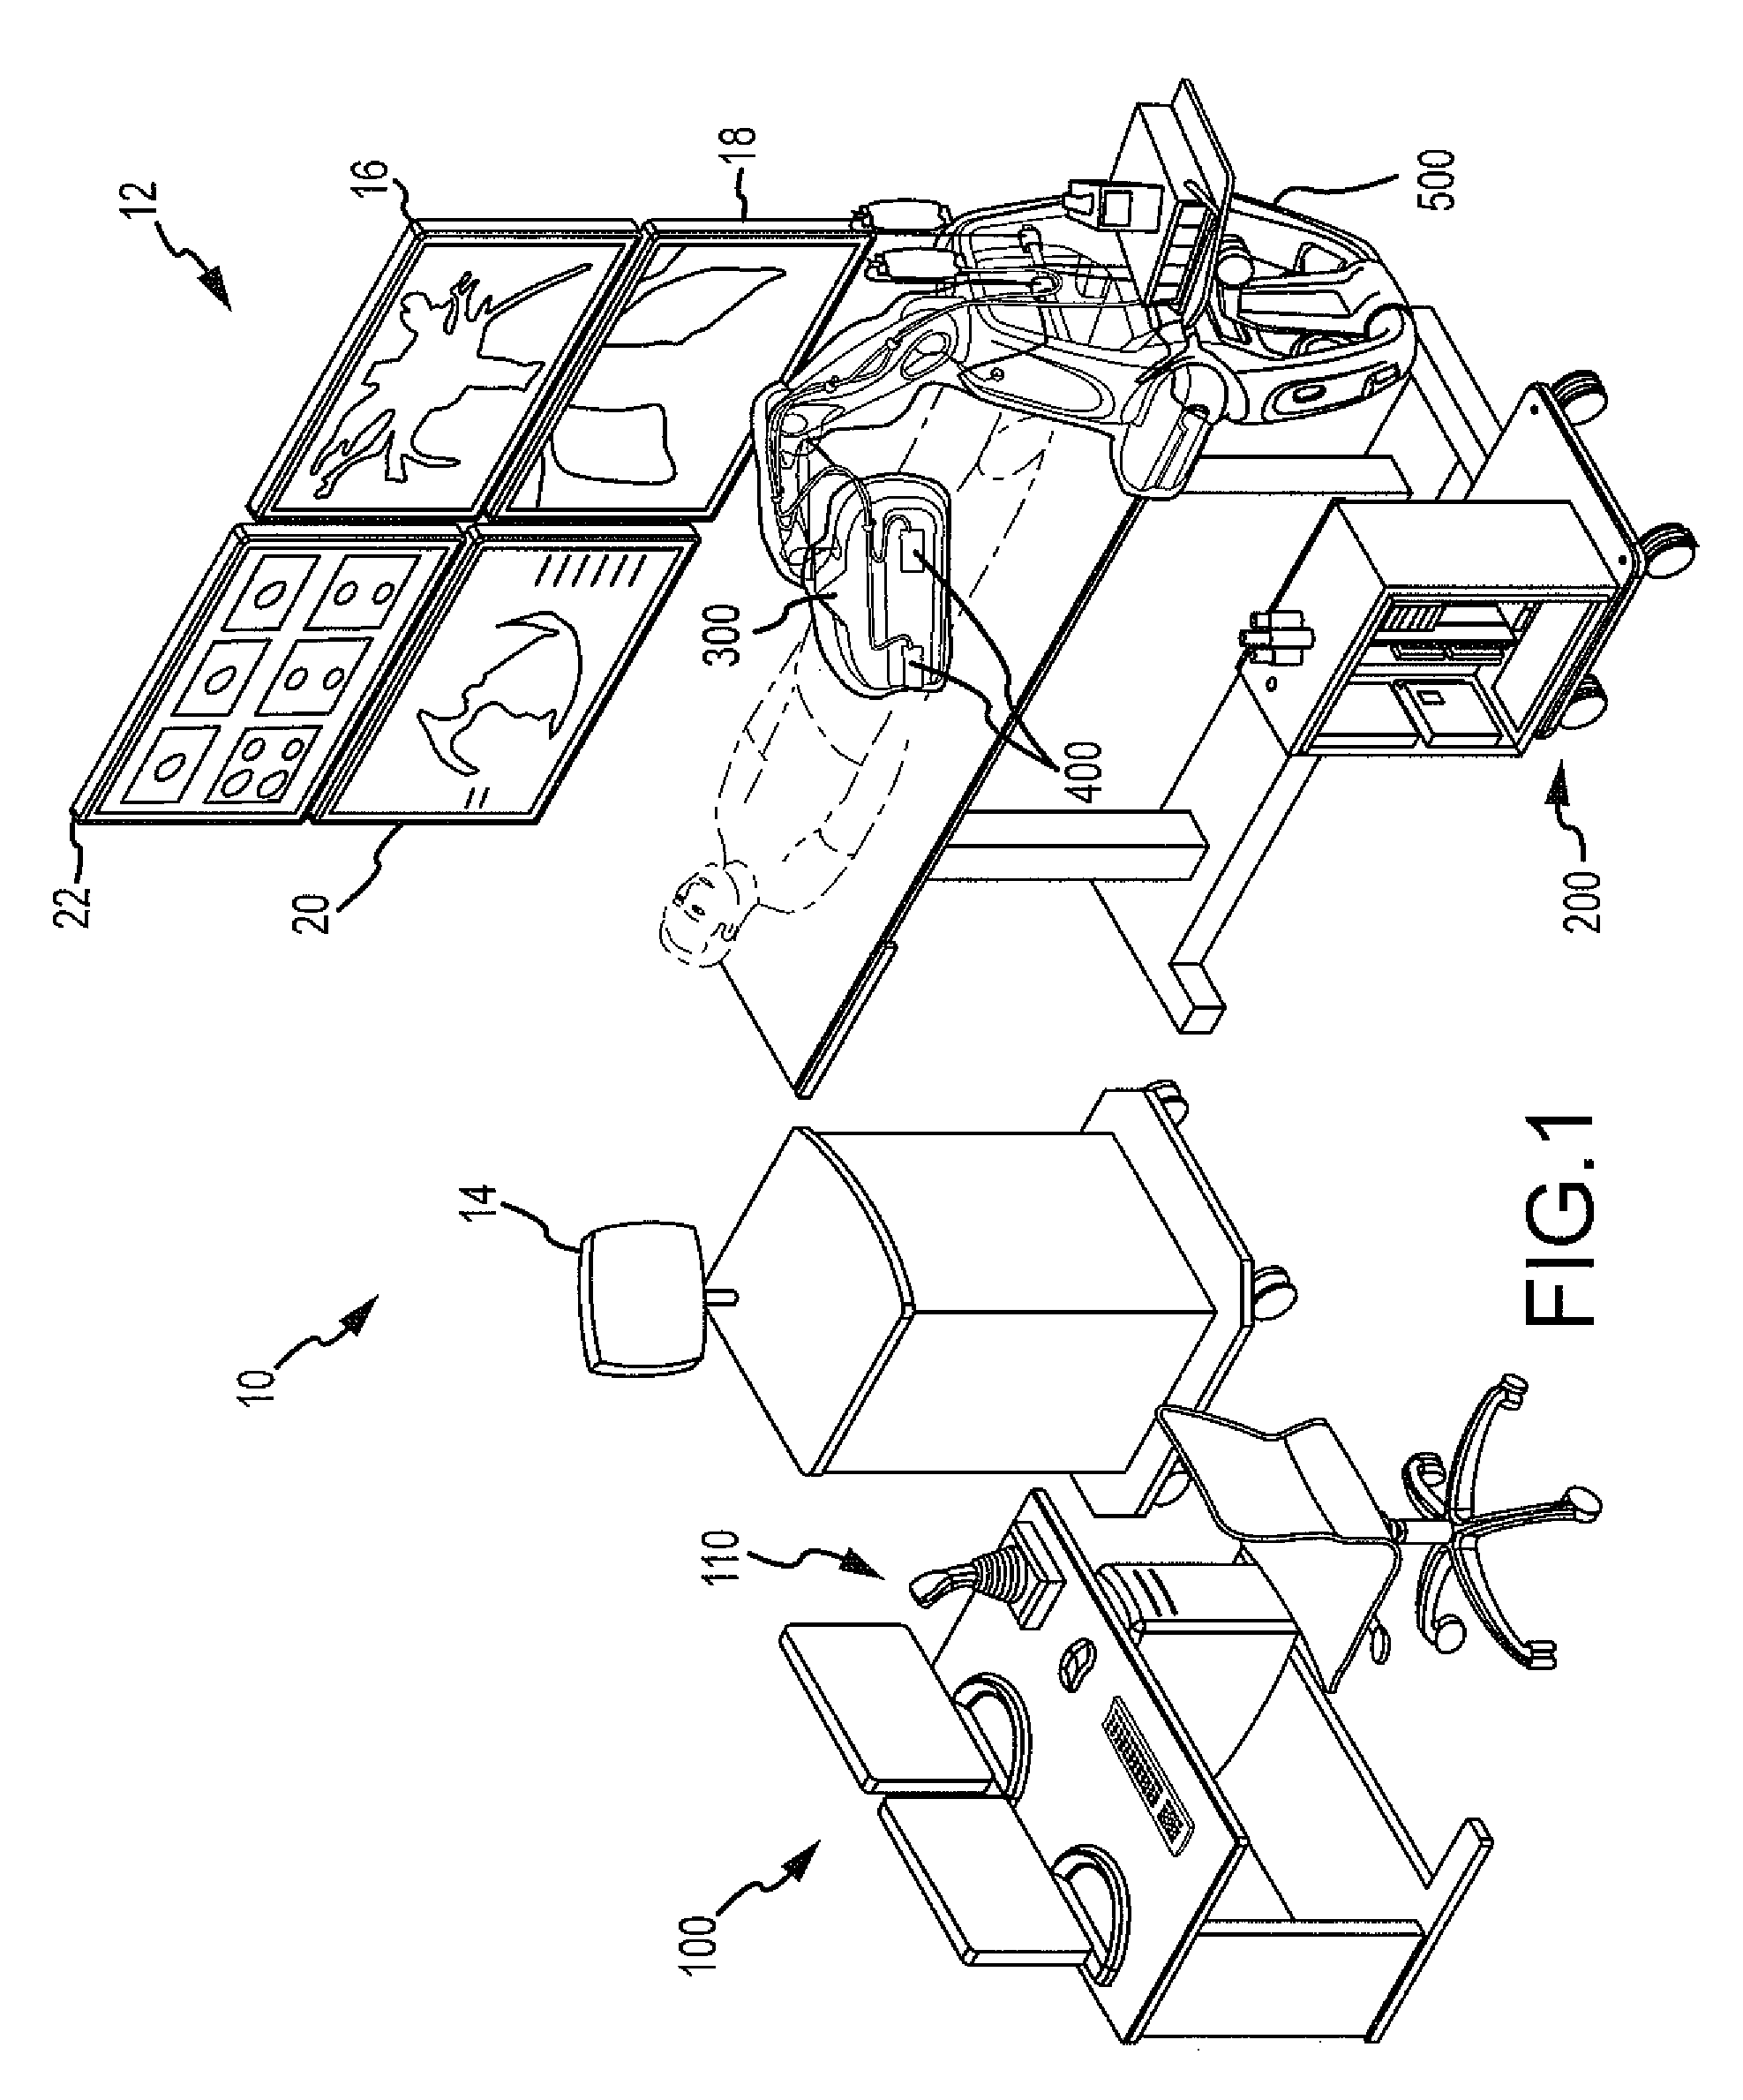 System and methods for avoiding data collisions over a data bus